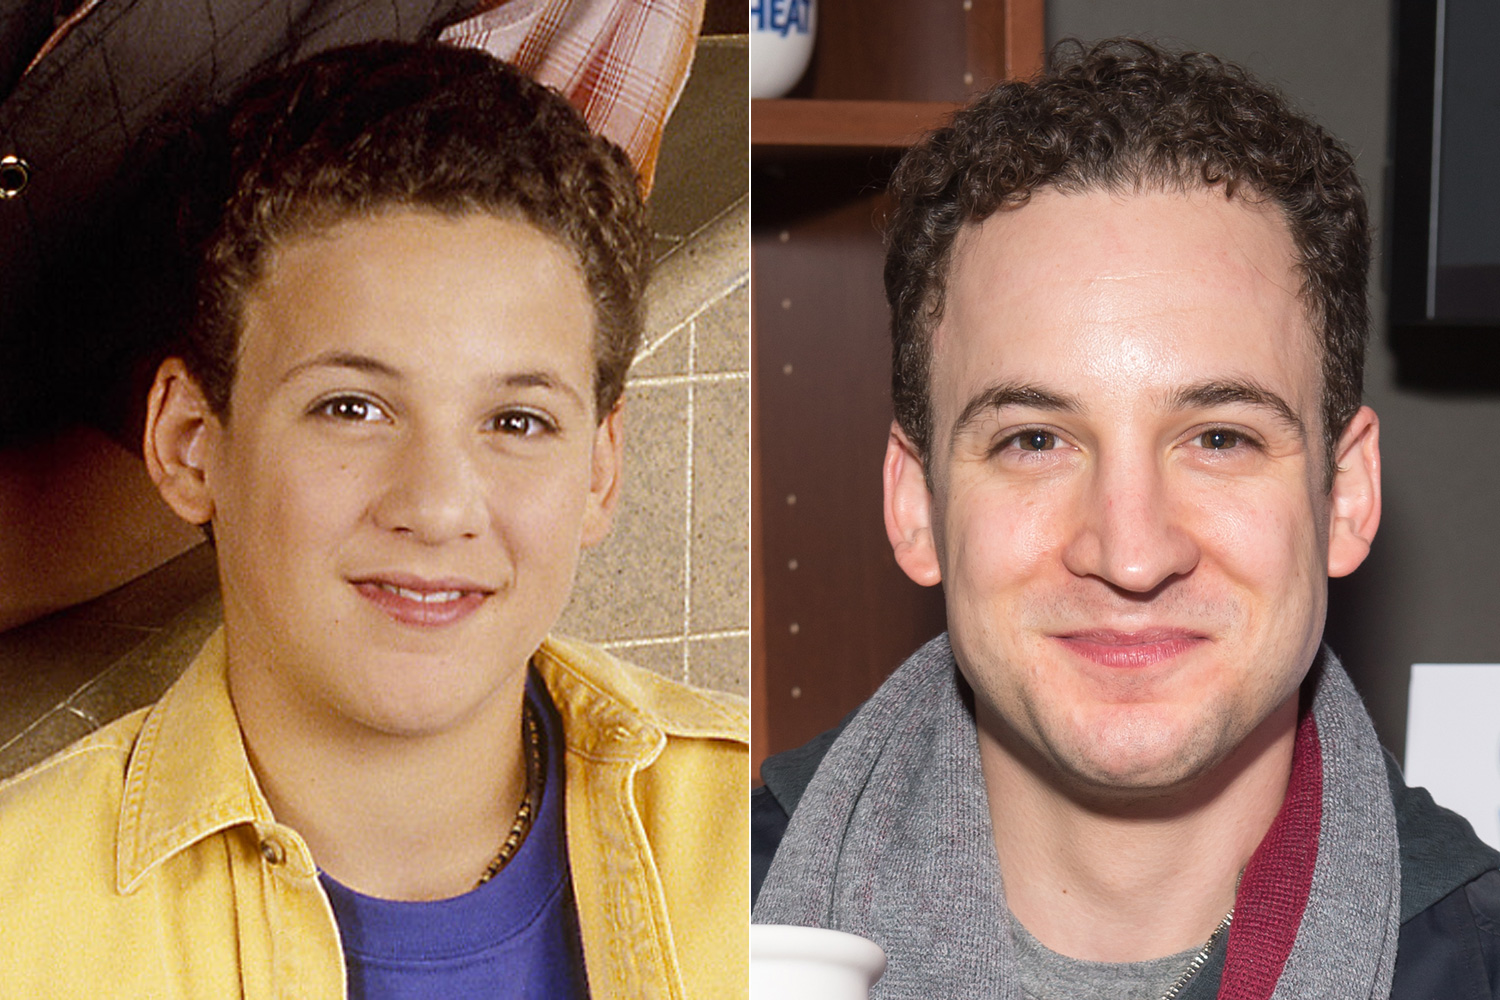 Ben Savage will be reprising his role as Cory Matthews in 'Girl Meets World.' Cory will be filling the large shoes of Mr. Feeny, teaching history to his daughter Riley (Rowan Blanchard) and her friends.